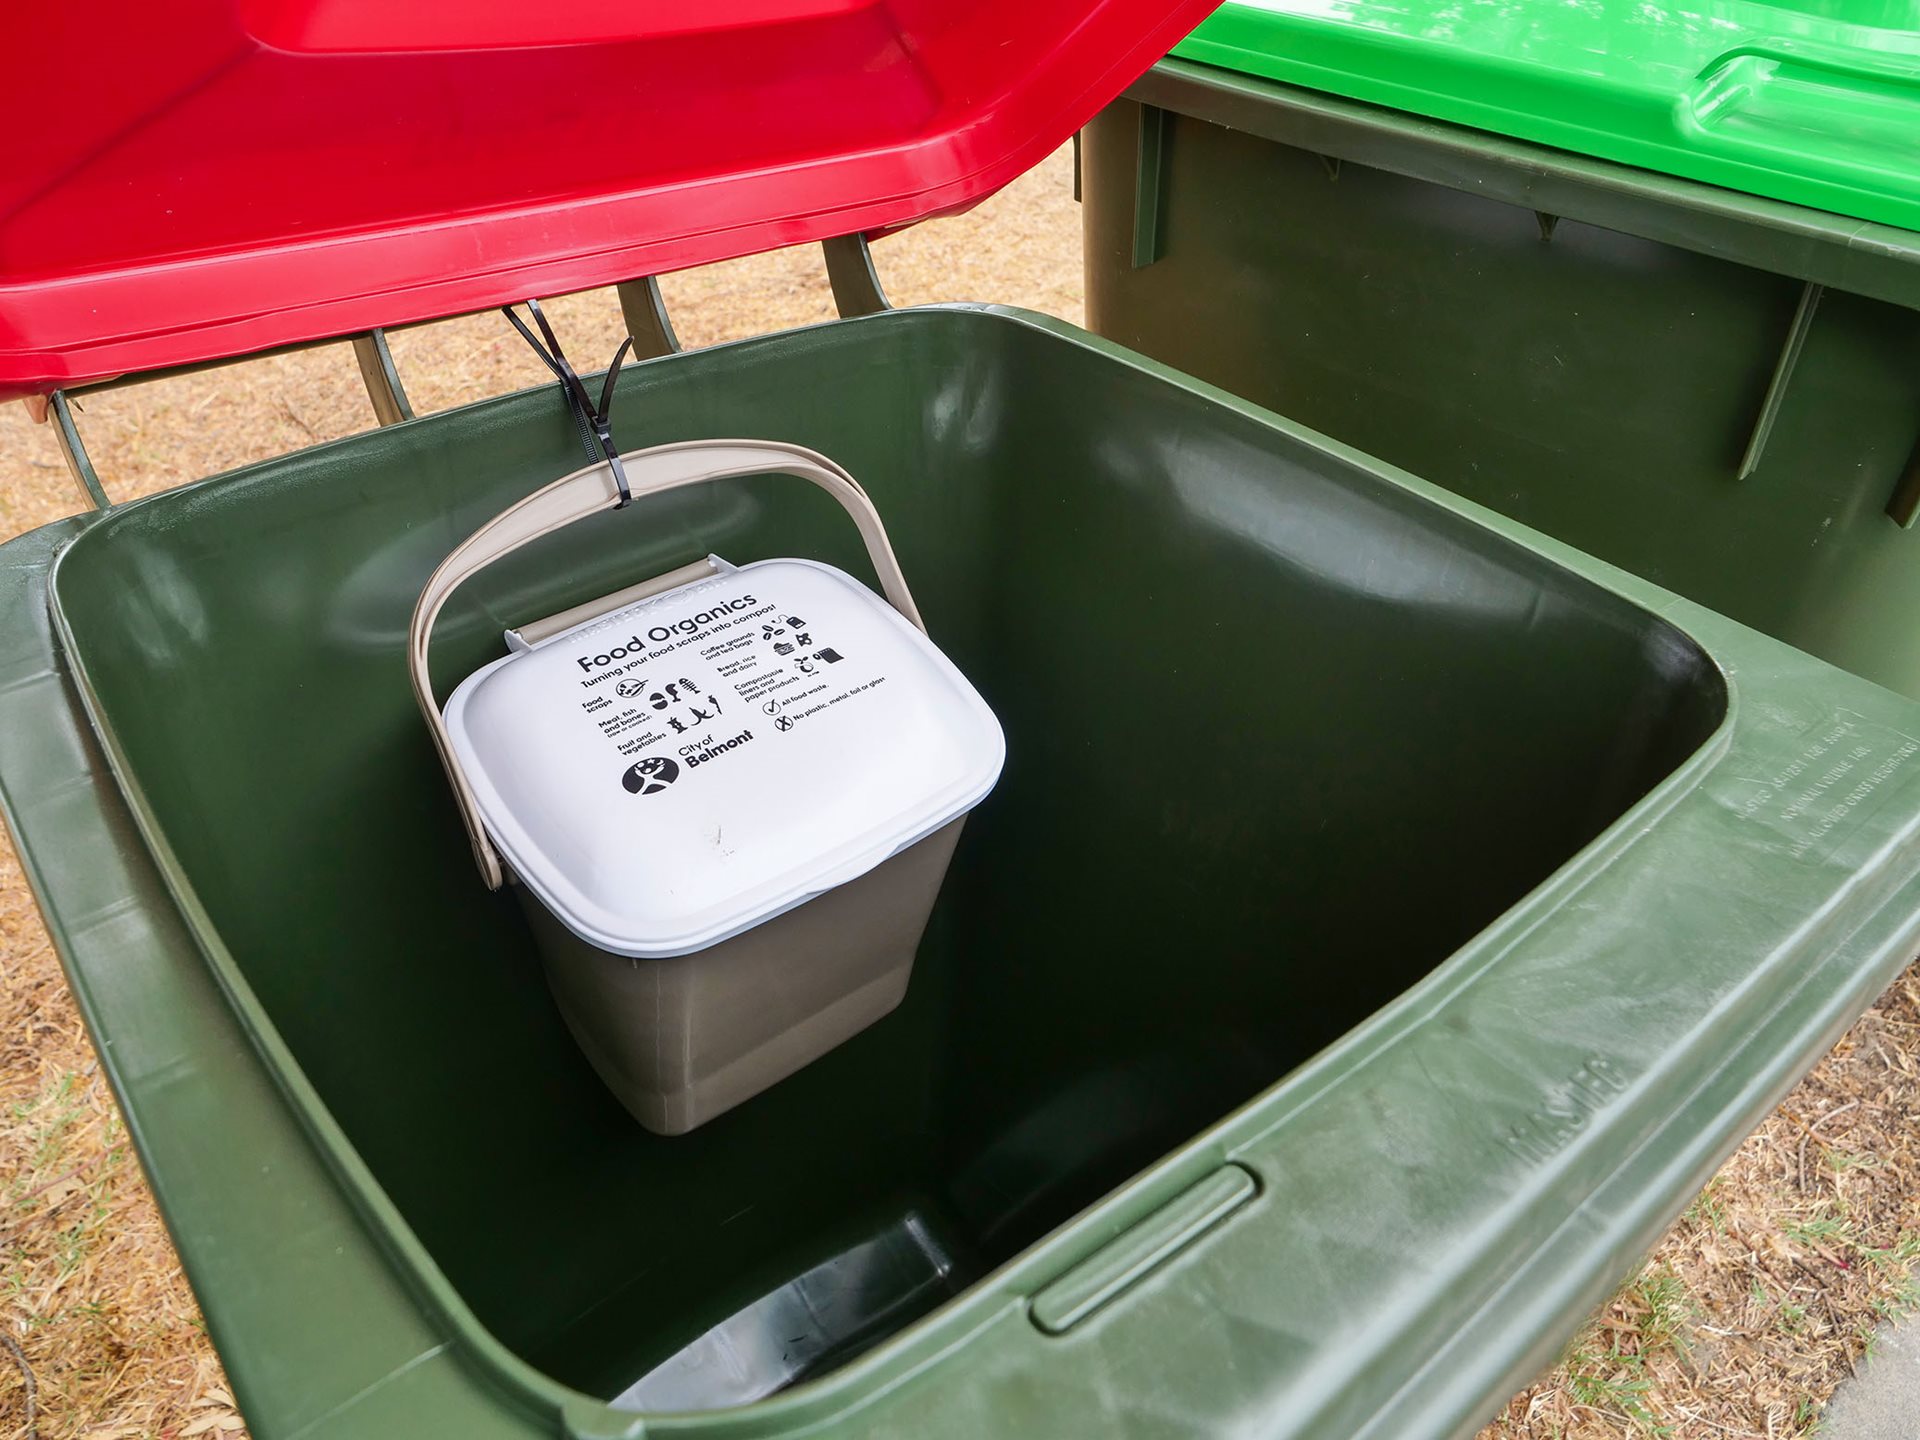 Kitchen caddy attached to the inside of a red lid general waste bin with a zip tie